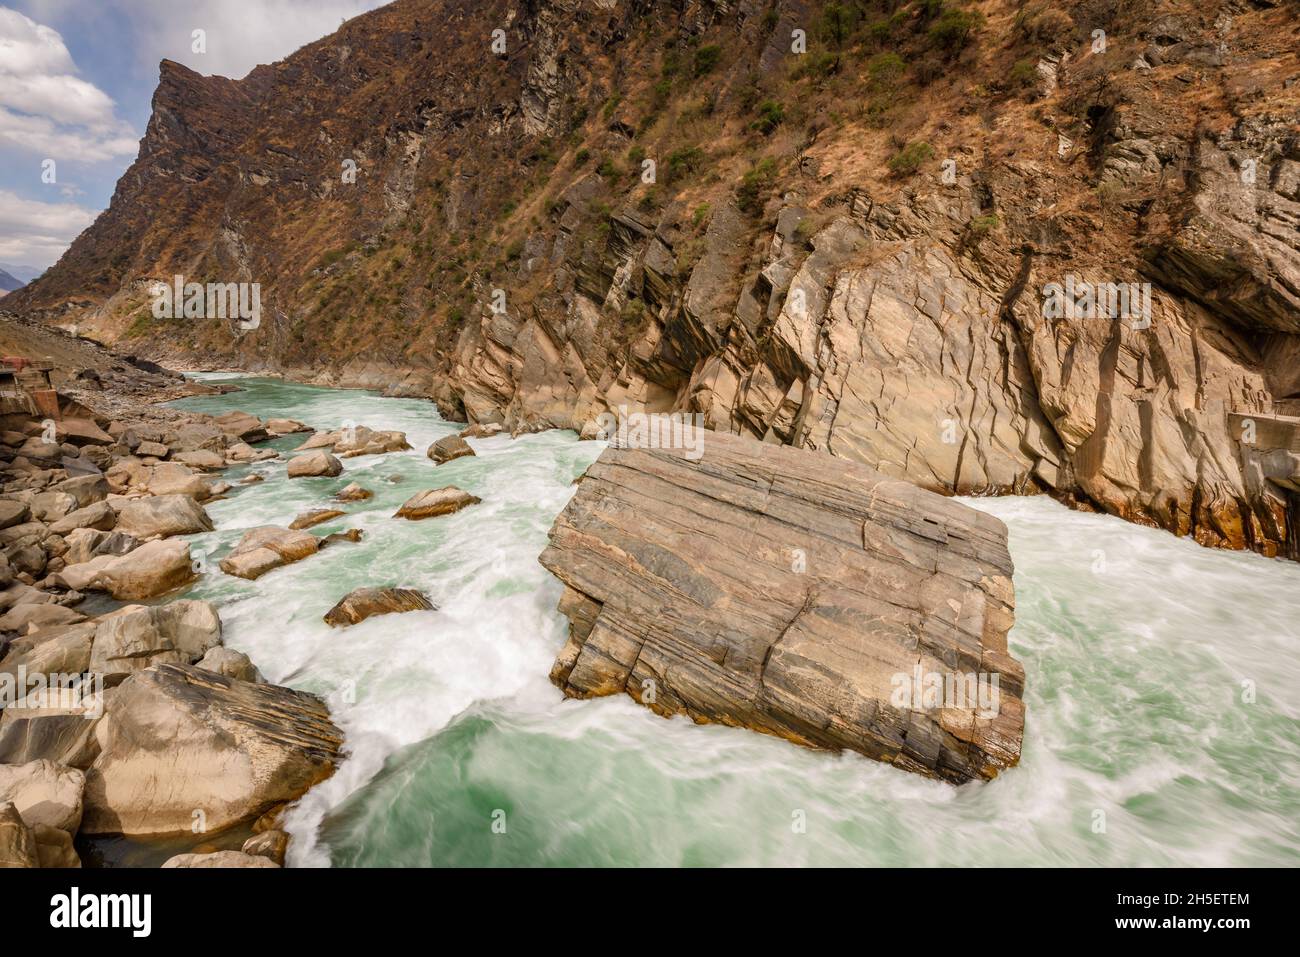 Fast flowing river at Tiger Leaping Gorge, a scenic canyon along Jinsha River. One of the deepest and most spectacular river canyons in the world. Stock Photo